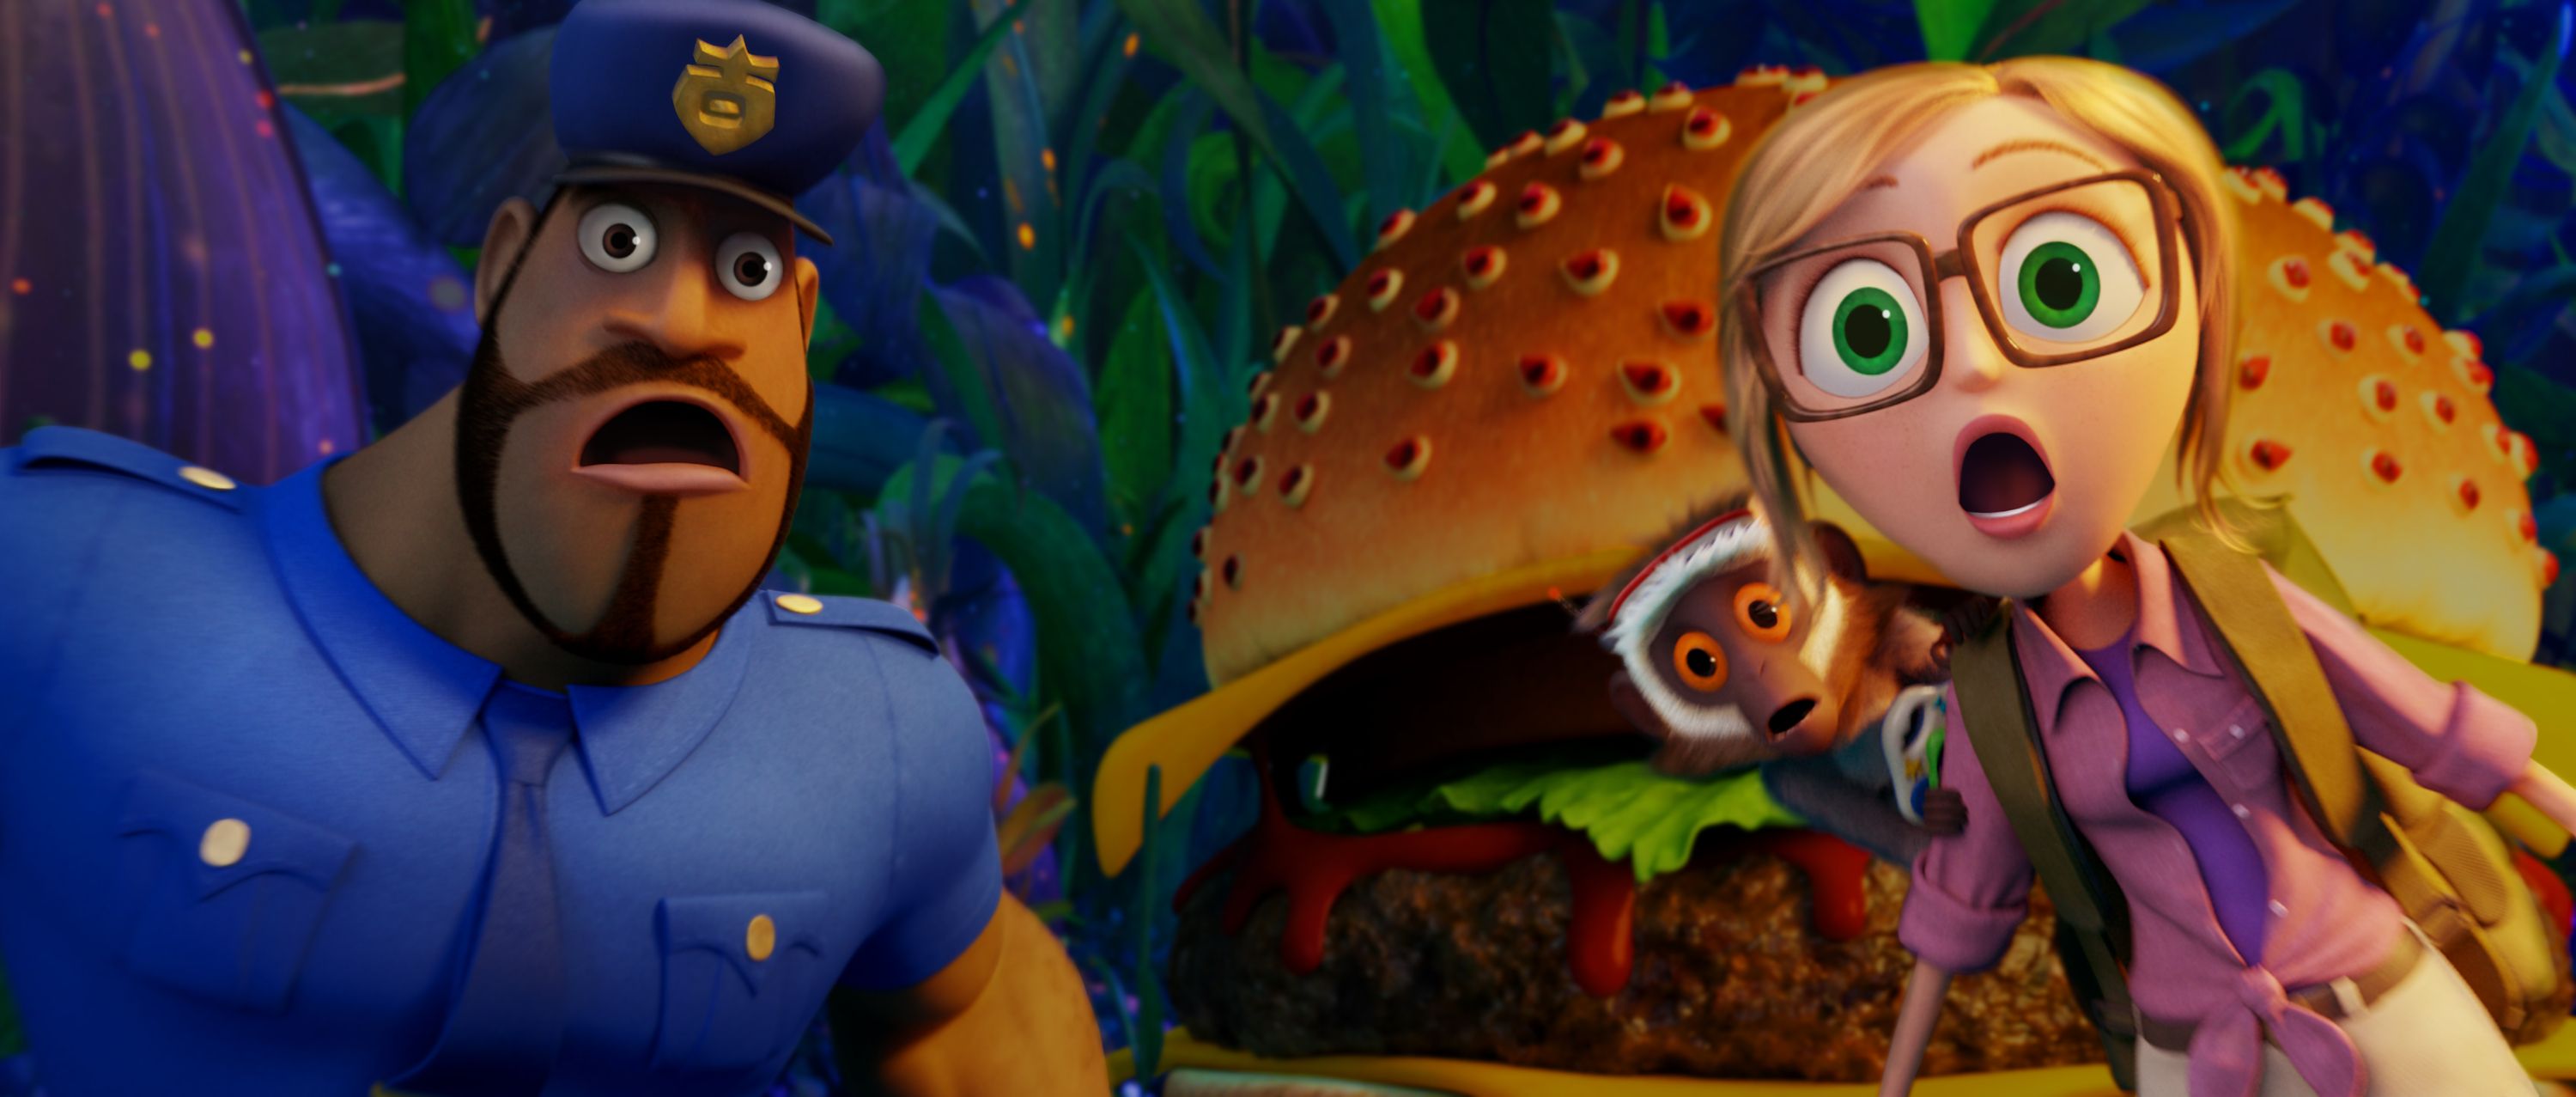 Cloudy with a Chance of Meatballs 2 Photo 2